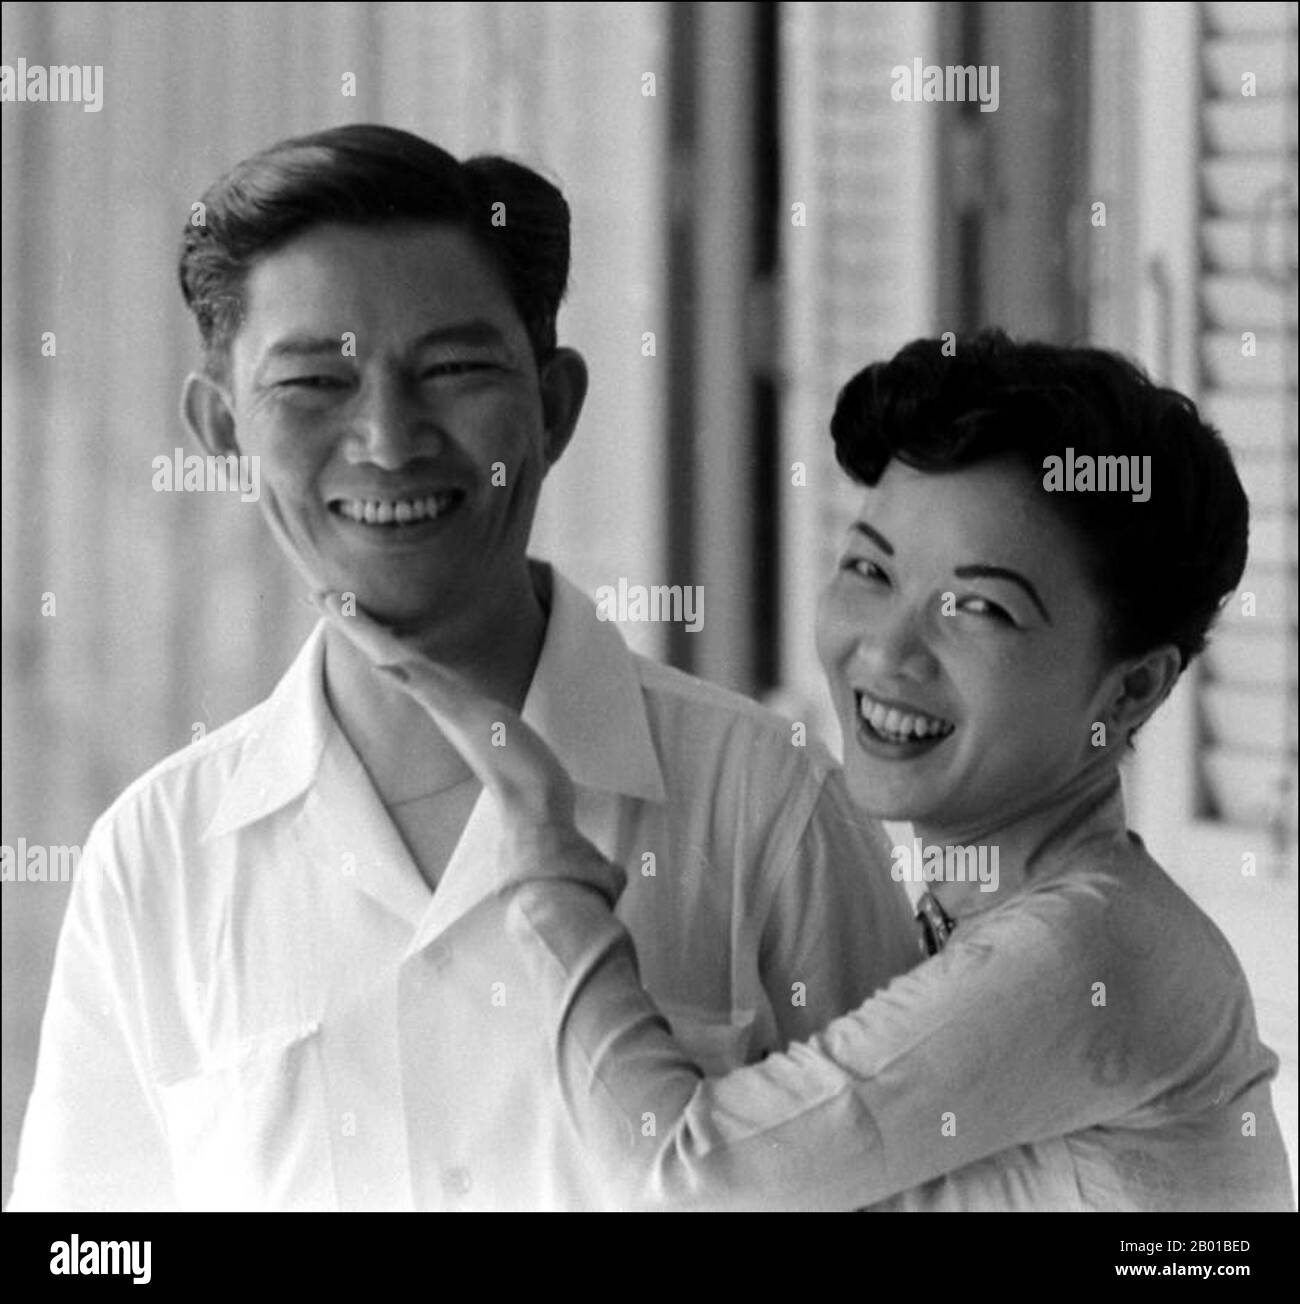 Vietnam: Madame Ngo Dinh Nhu (15 April 1924 - 24 April 2011), First Lady of South Vietnam (r. 1955-1963), with her husband Ngo Dinh Nhu (7 October 1910 - 2 November 1963), brother and chief adviser to President Ngo Dinh Diem, c. 1956.  Tran Le Xuan, popularly known as Madame Nhu but more properly Madame Ngo Dinh Nhu, was considered the First Lady of South Vietnam from 1955 to 1963. She was the wife of Ngo Dinh Nhu, brother and chief adviser to President Ngo Dinh Diem. As Diem was a lifelong bachelor, and because the Nhus lived in the Independence Palace, she was considered to be the First Lady Stock Photo